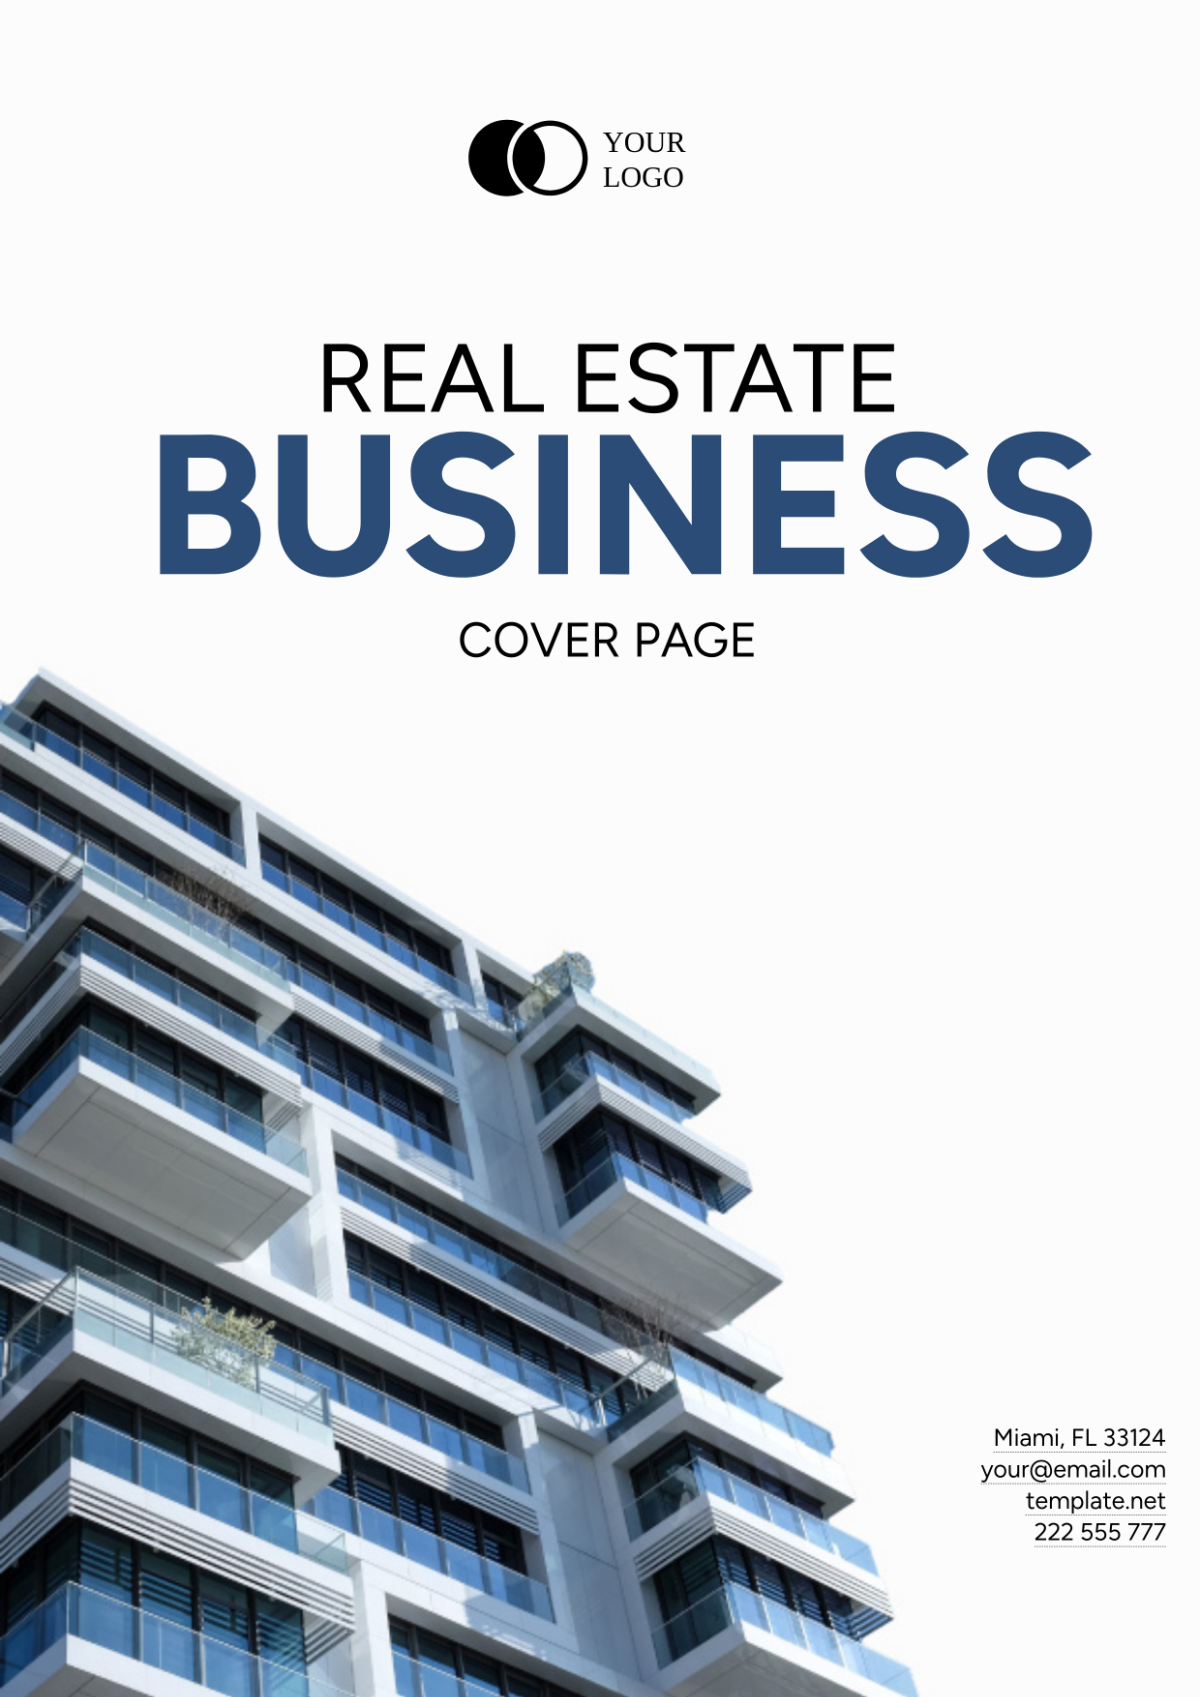 Real Estate Business Cover Page